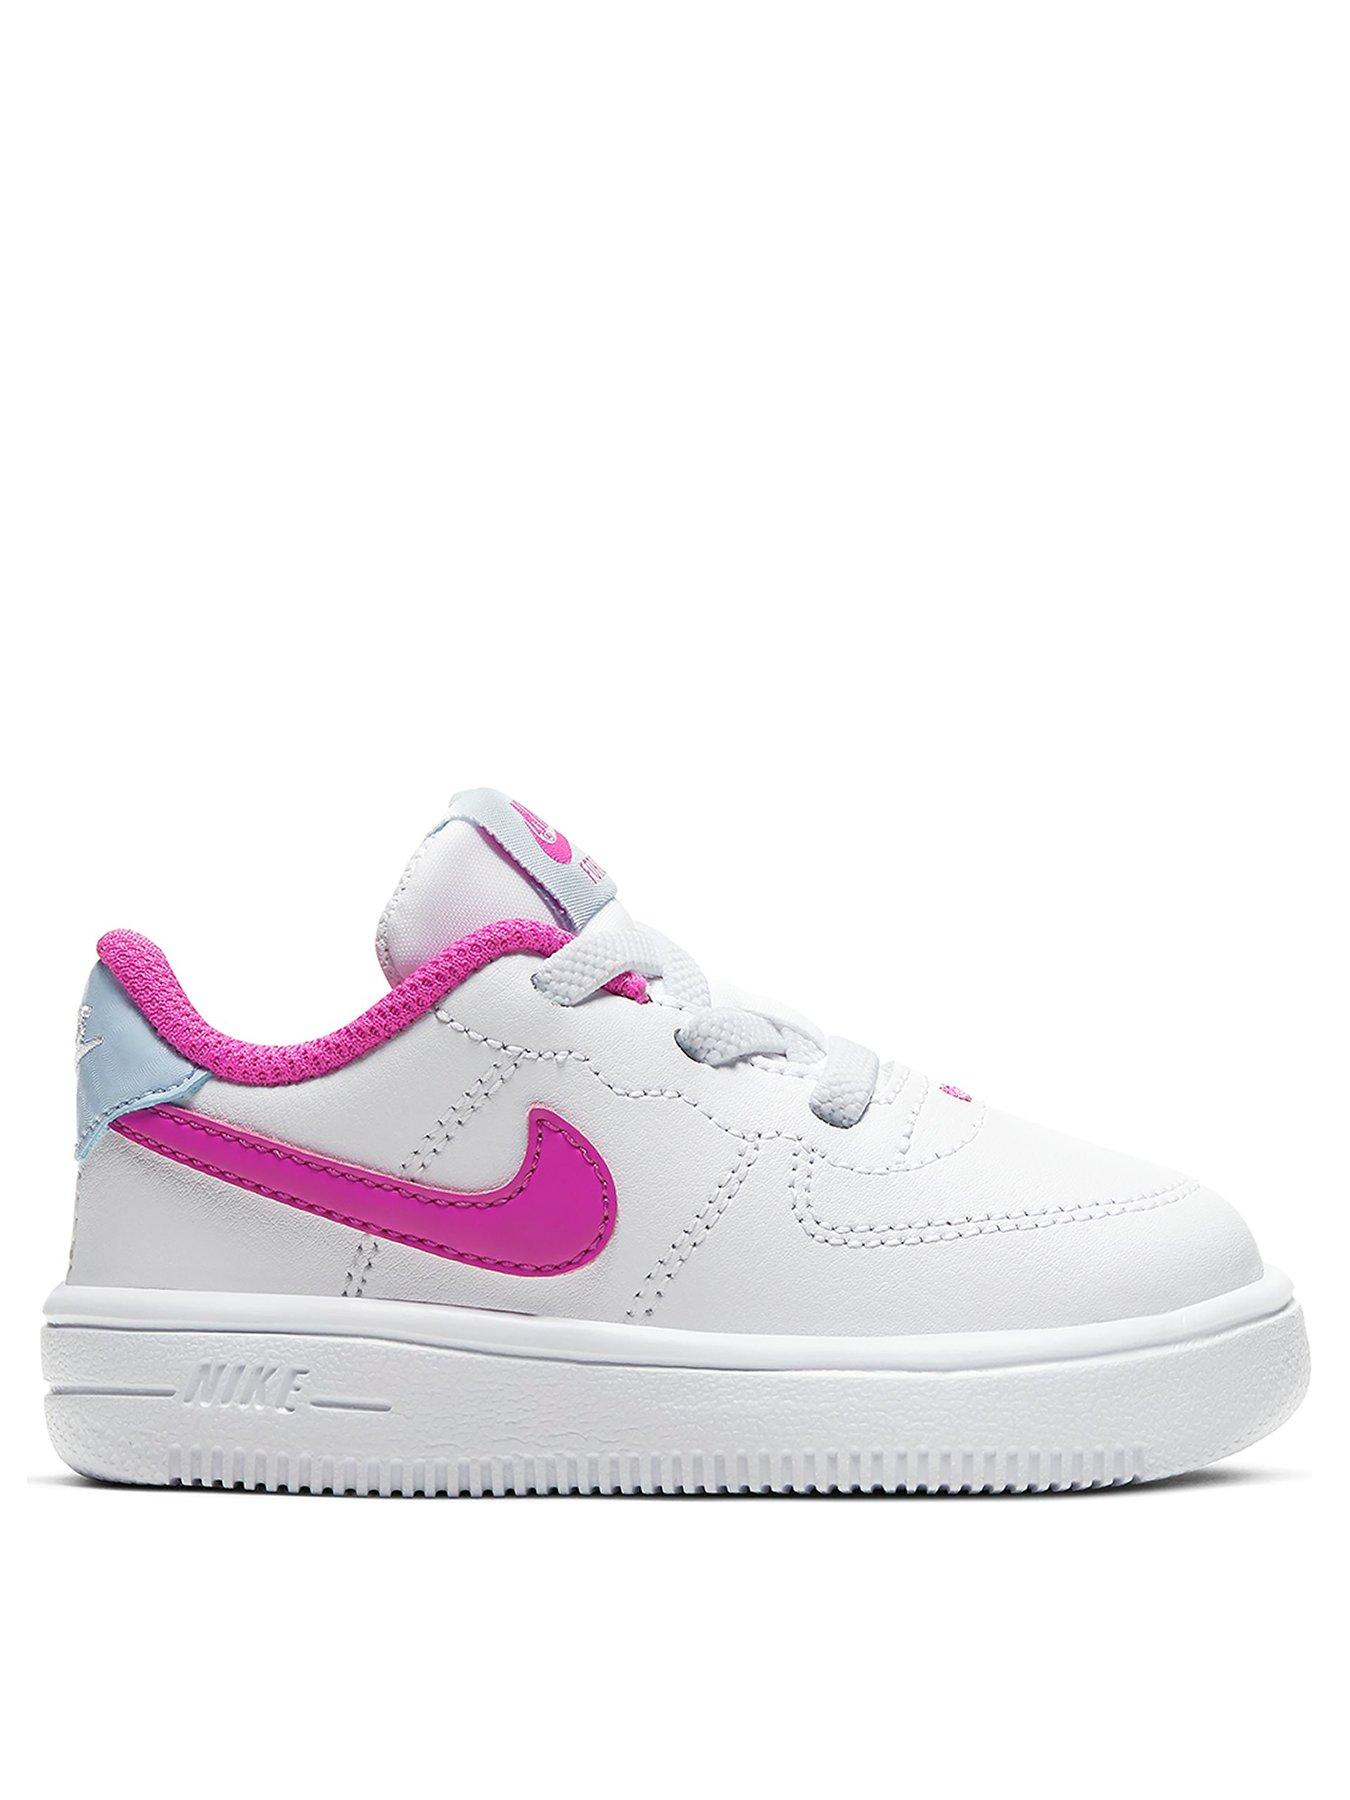 air force 1 18 infant trainer